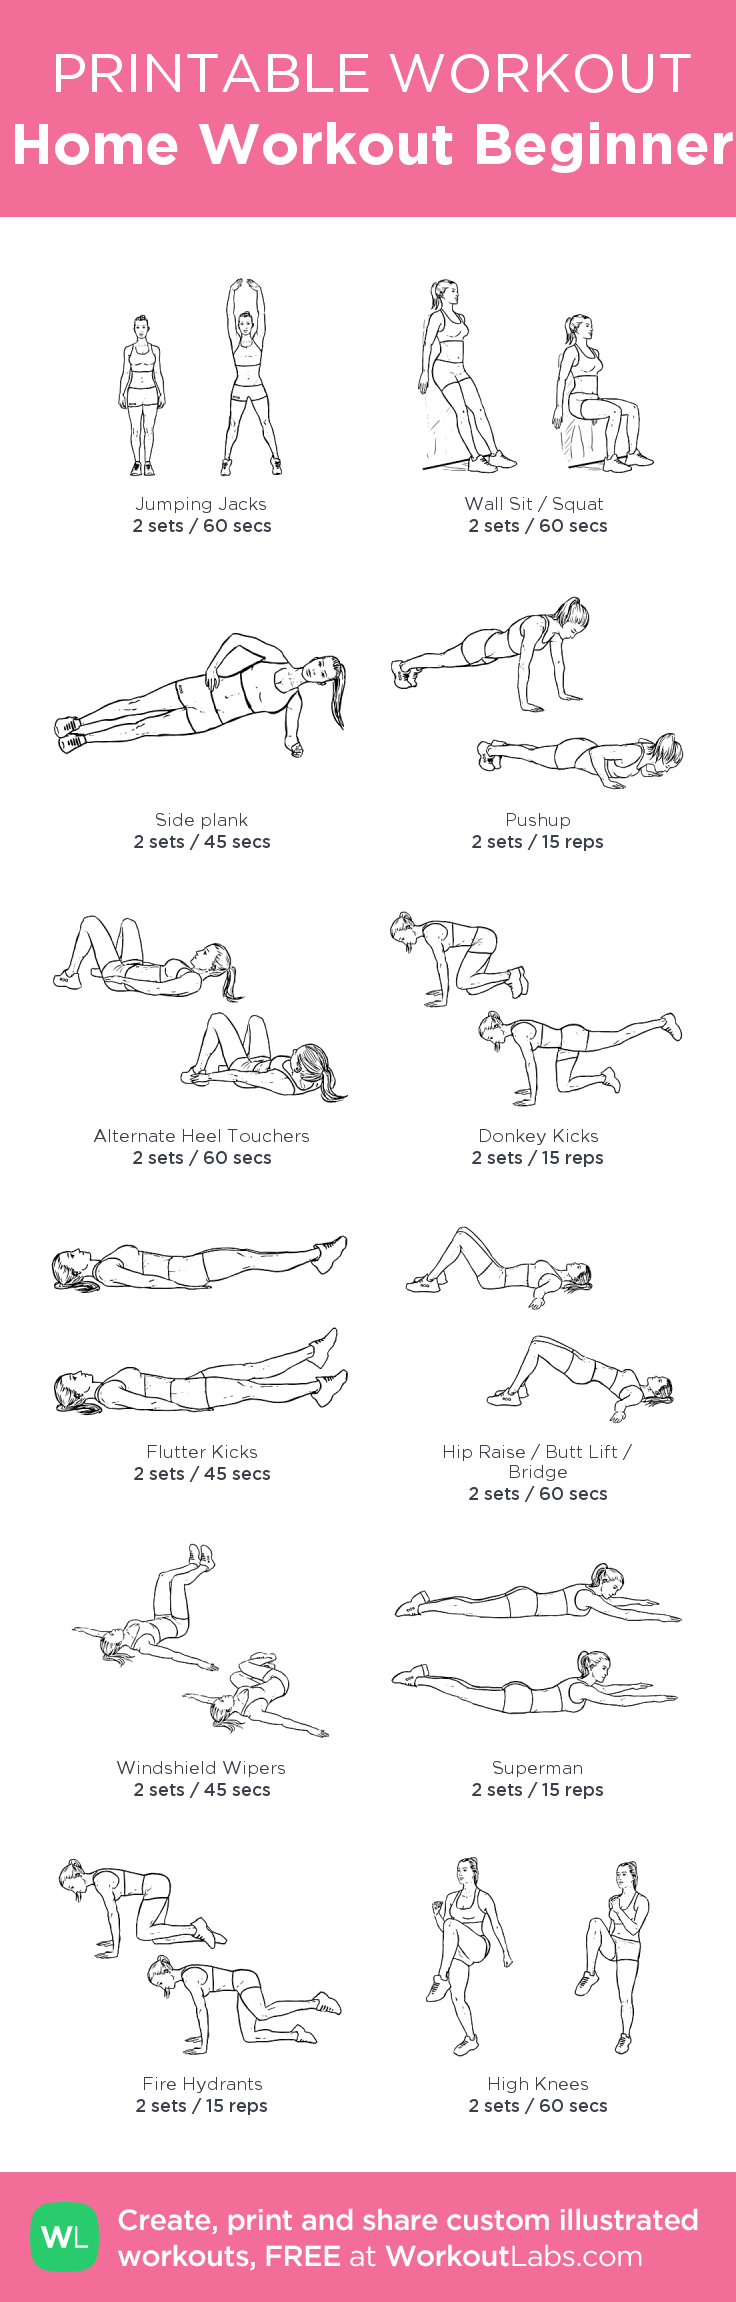 Home Workout for Beginner: my custom printable workout by 